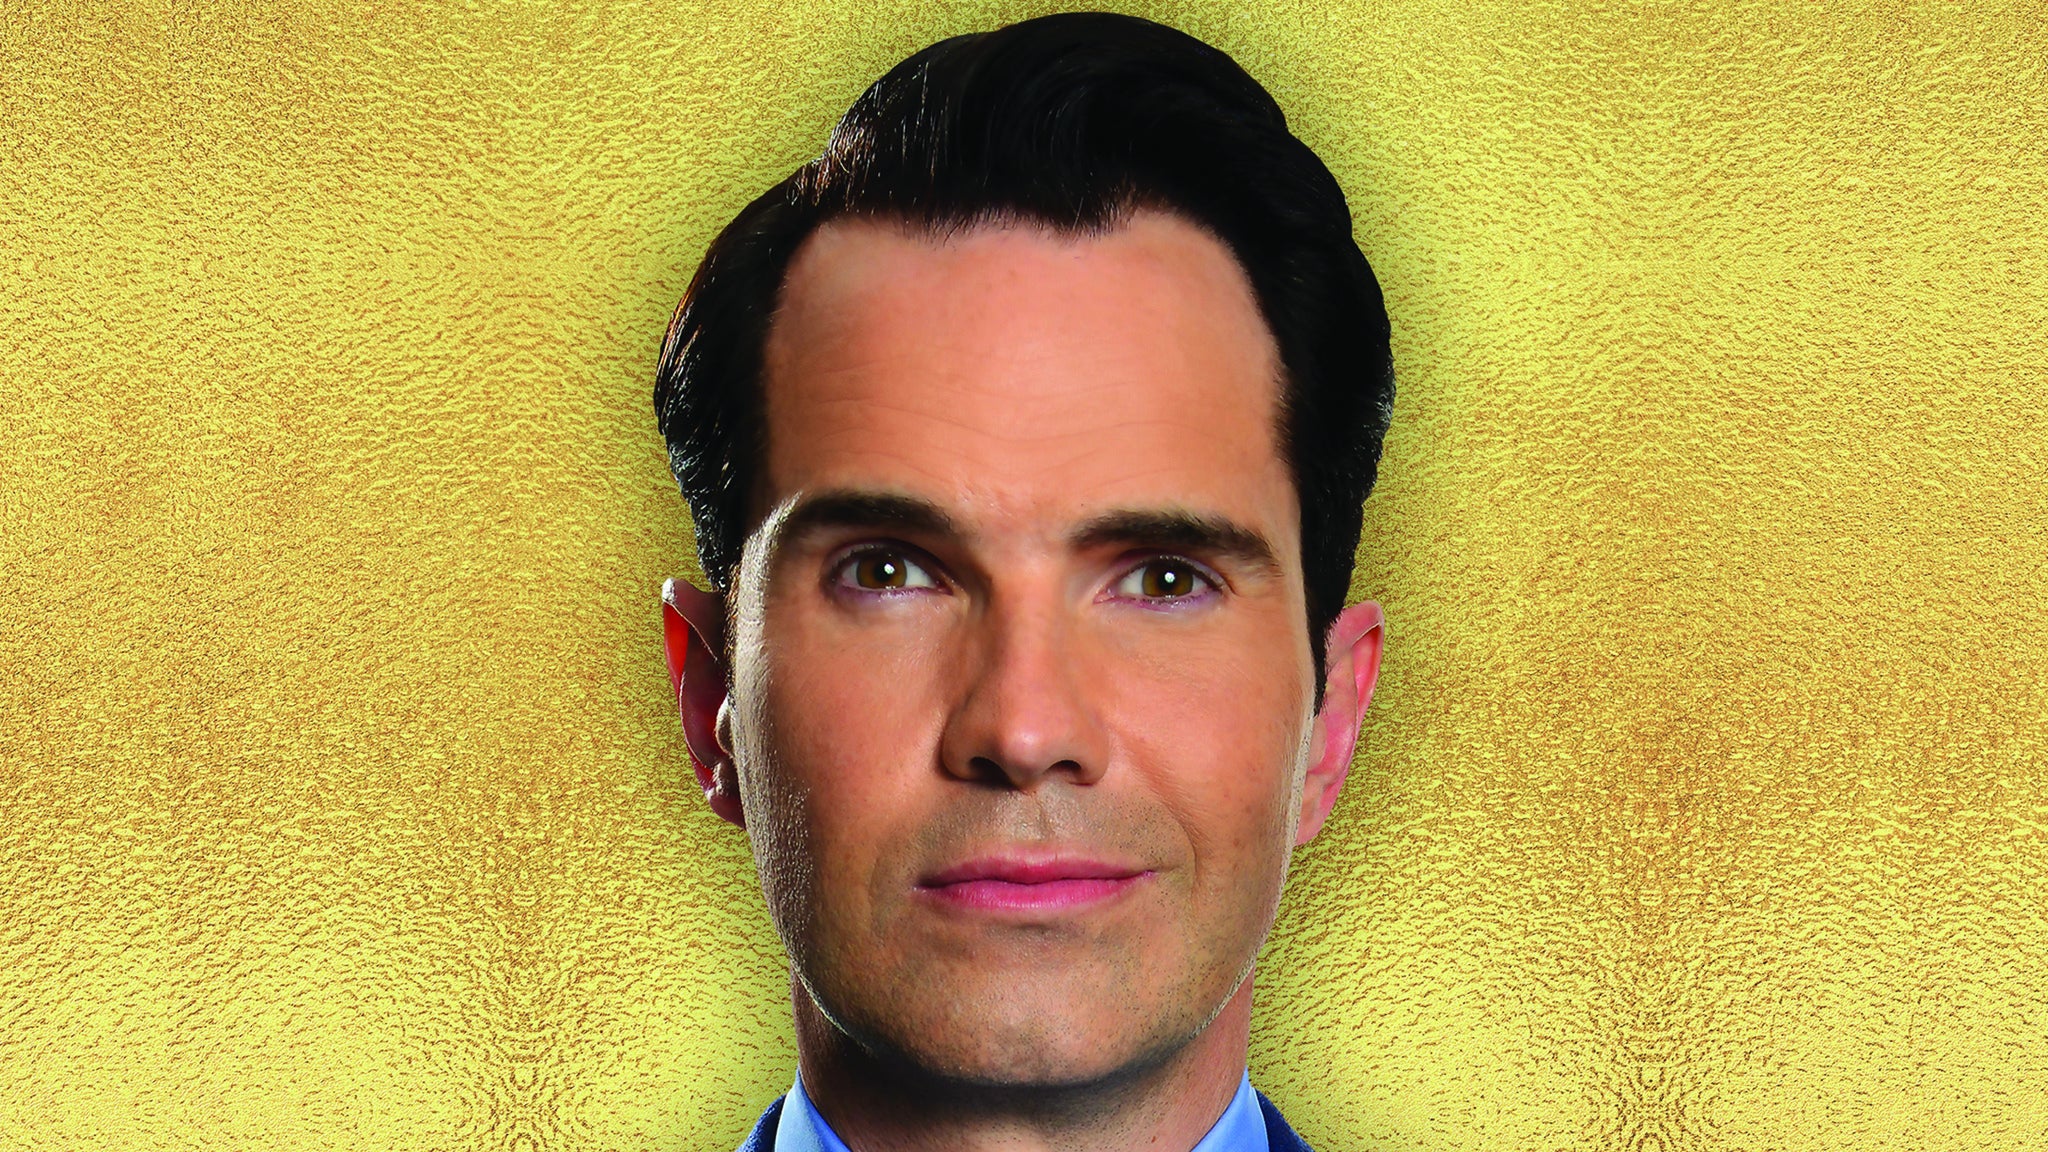 Netflix Is A Joke Presents: Jimmy Carr in Los Angeles promo photo for Ticketmaster presale offer code